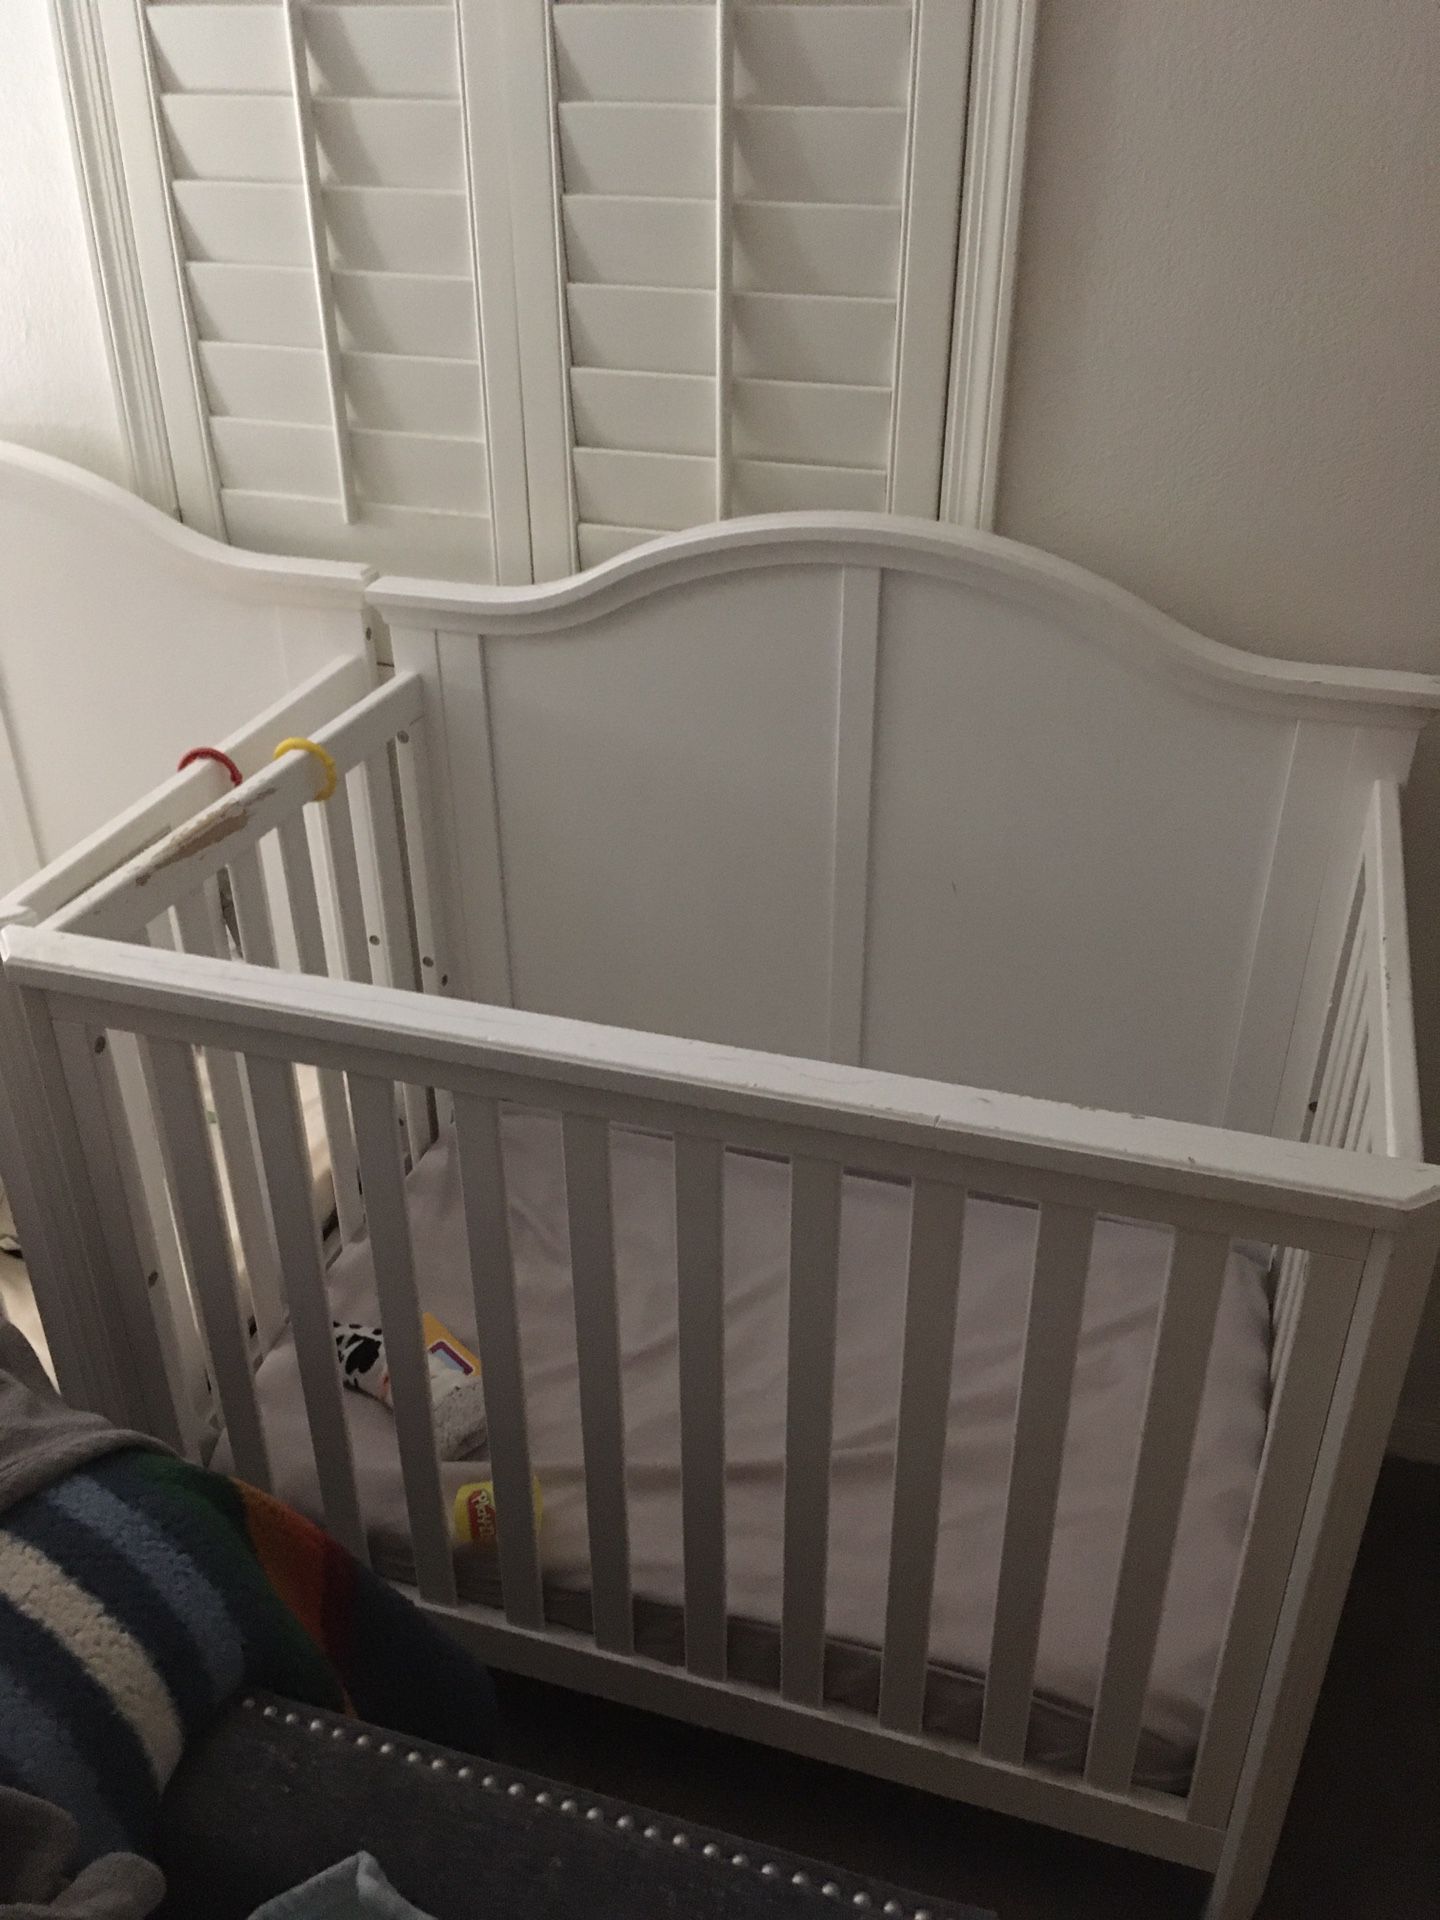 Twins Special Two Baby Cribs With Washable Matress